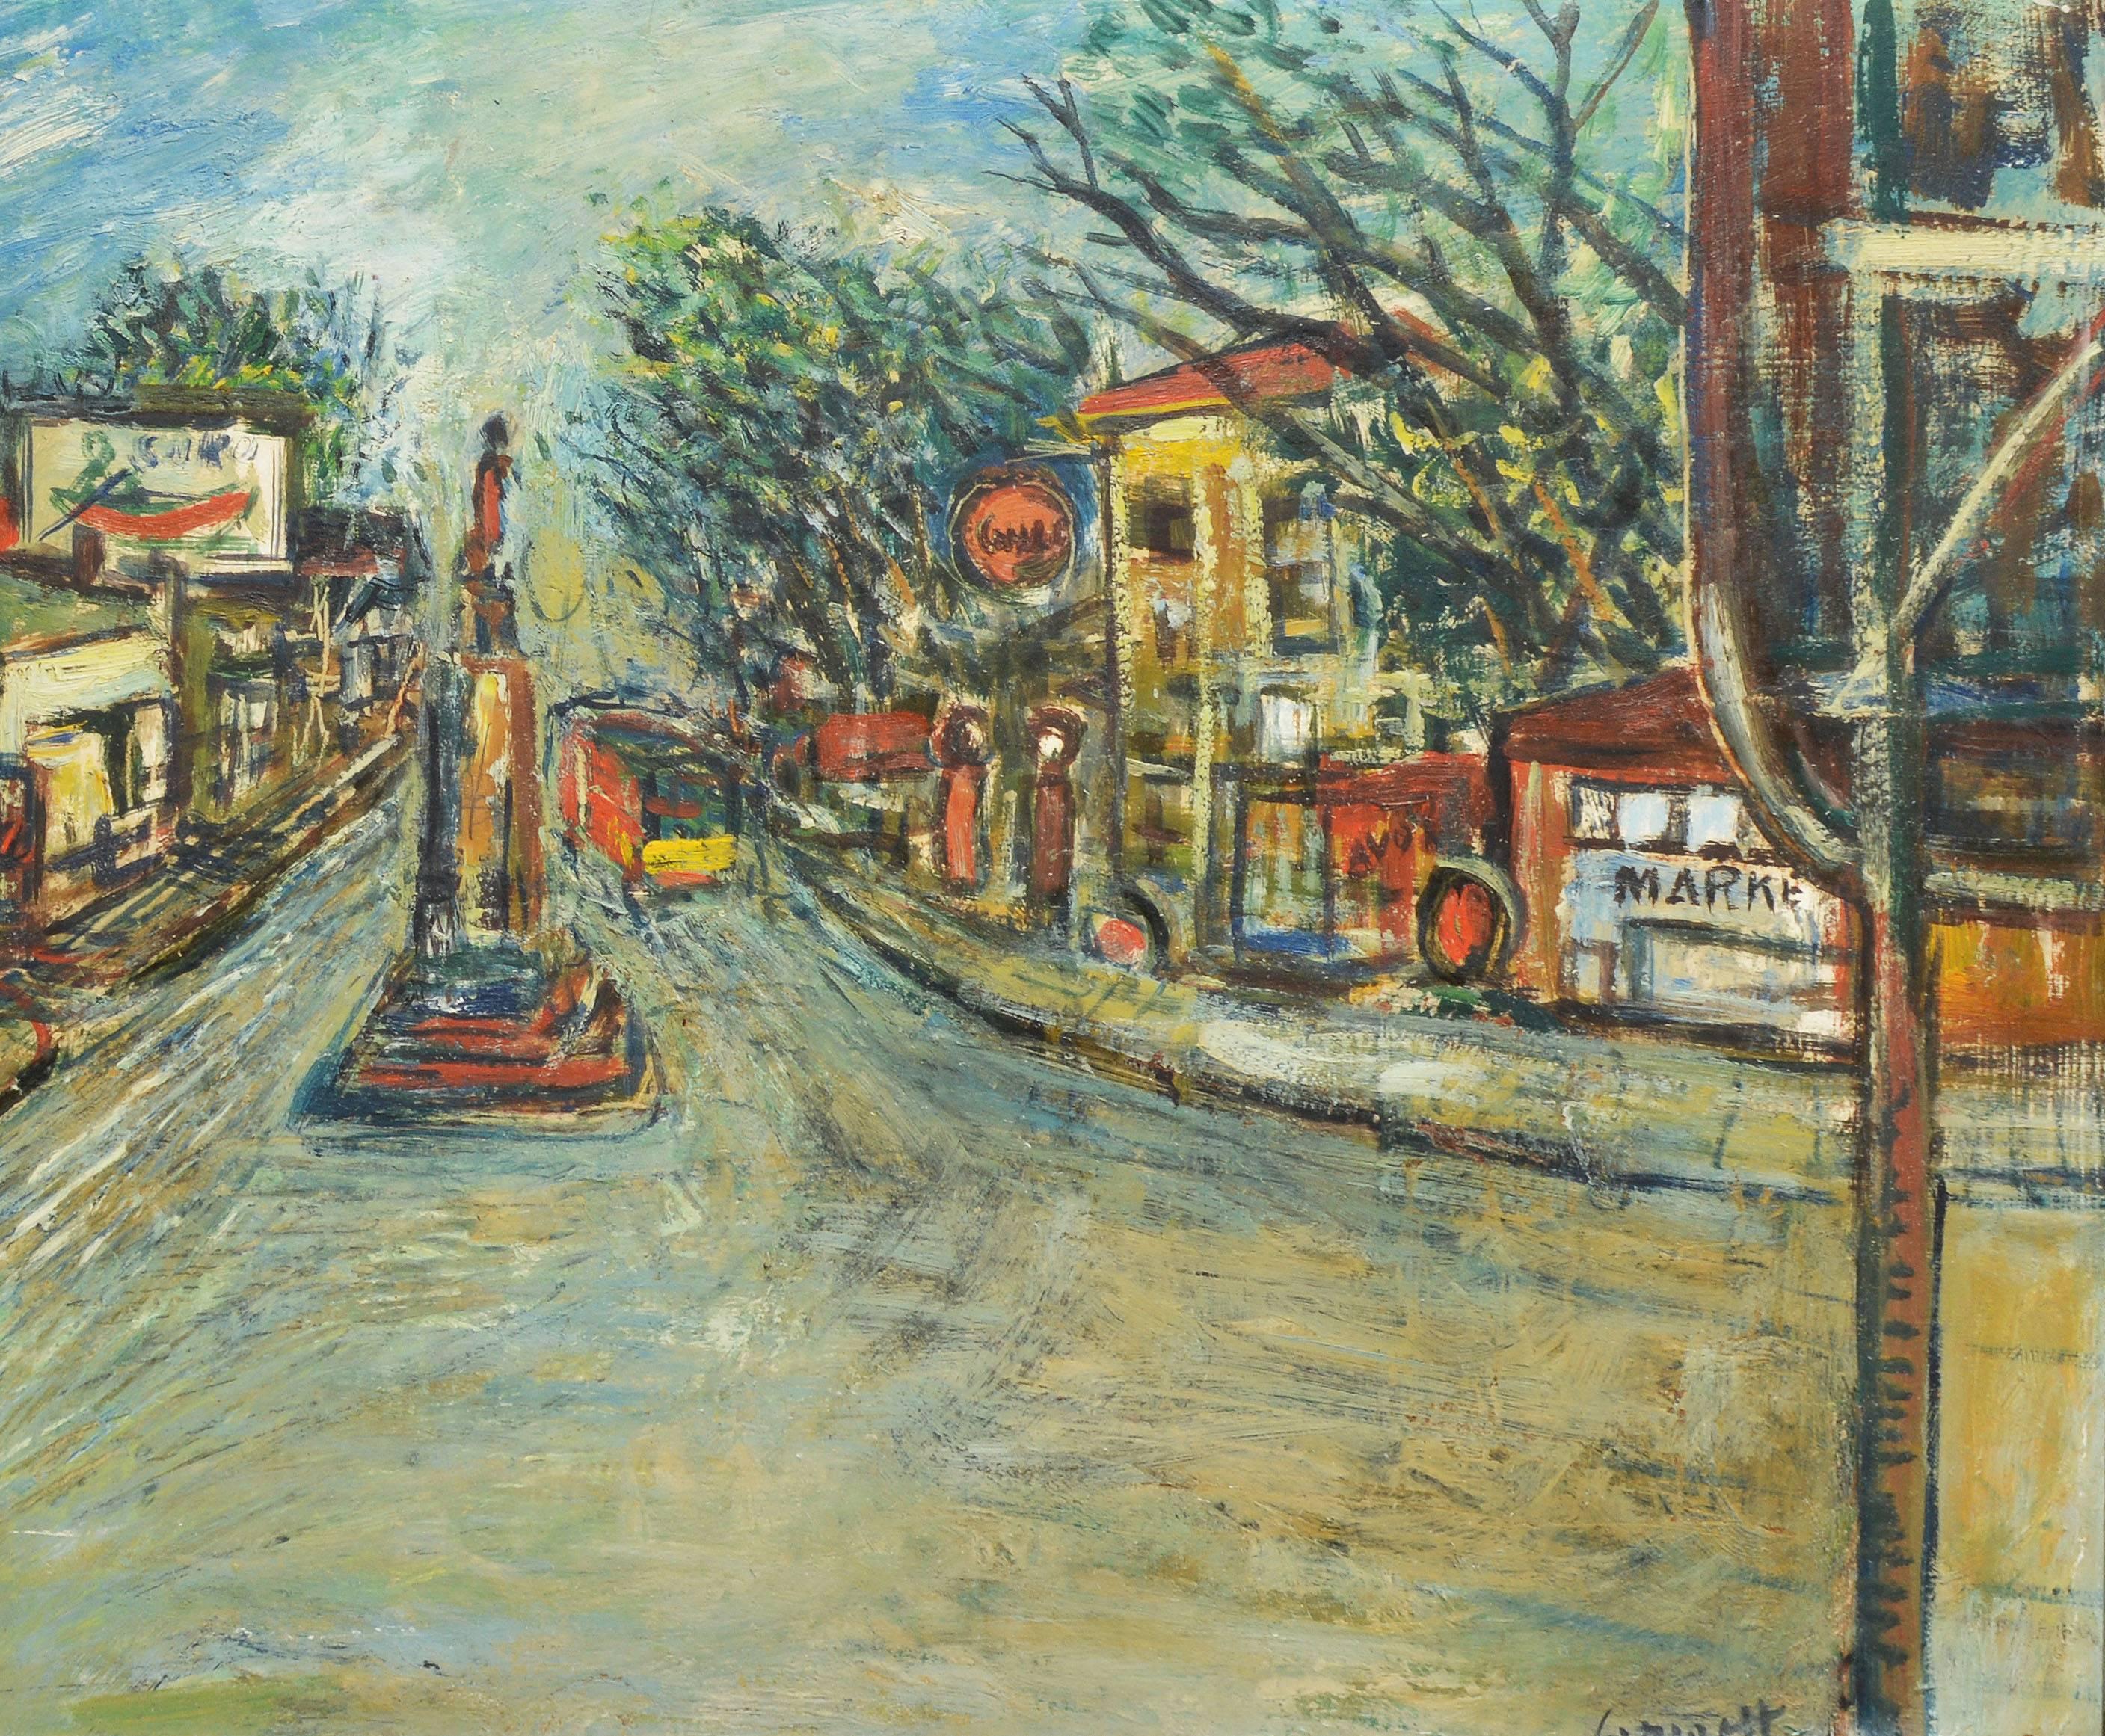 Modernist view of a Boston street.  Oil on board, circa 1950.  Signed illegibly lower right.  Displayed in a silver frame.  Image size, 23.5